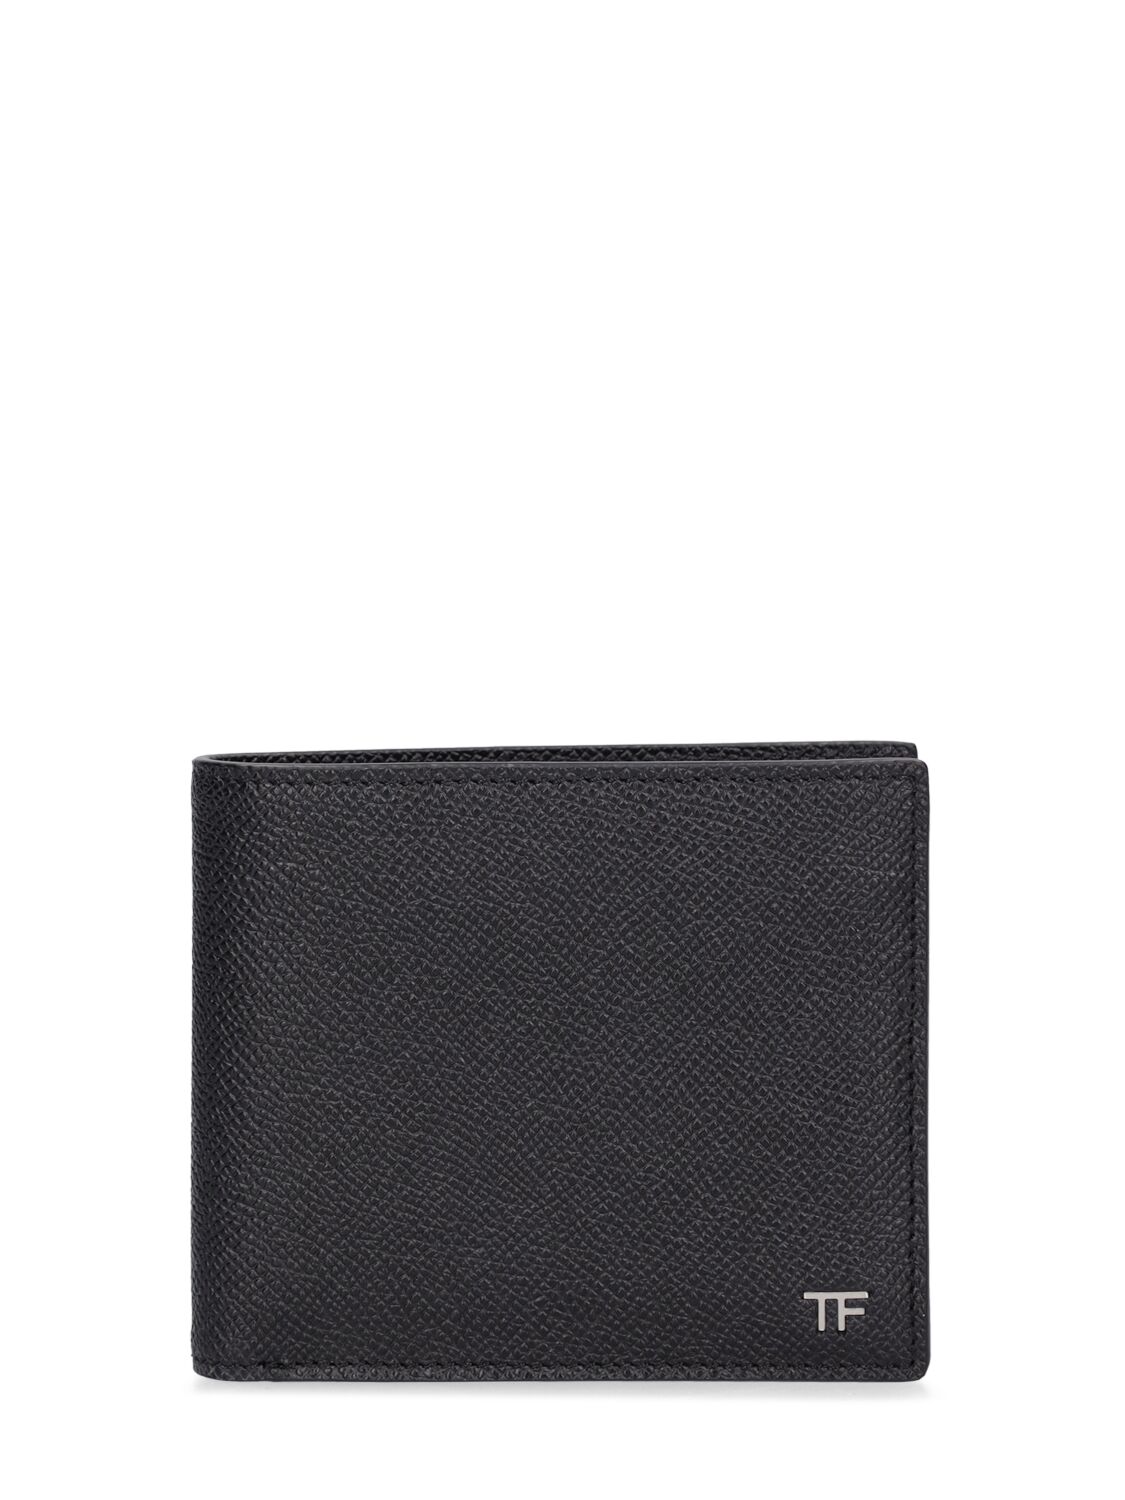 Image of Saffiano Leather Bifold Wallet